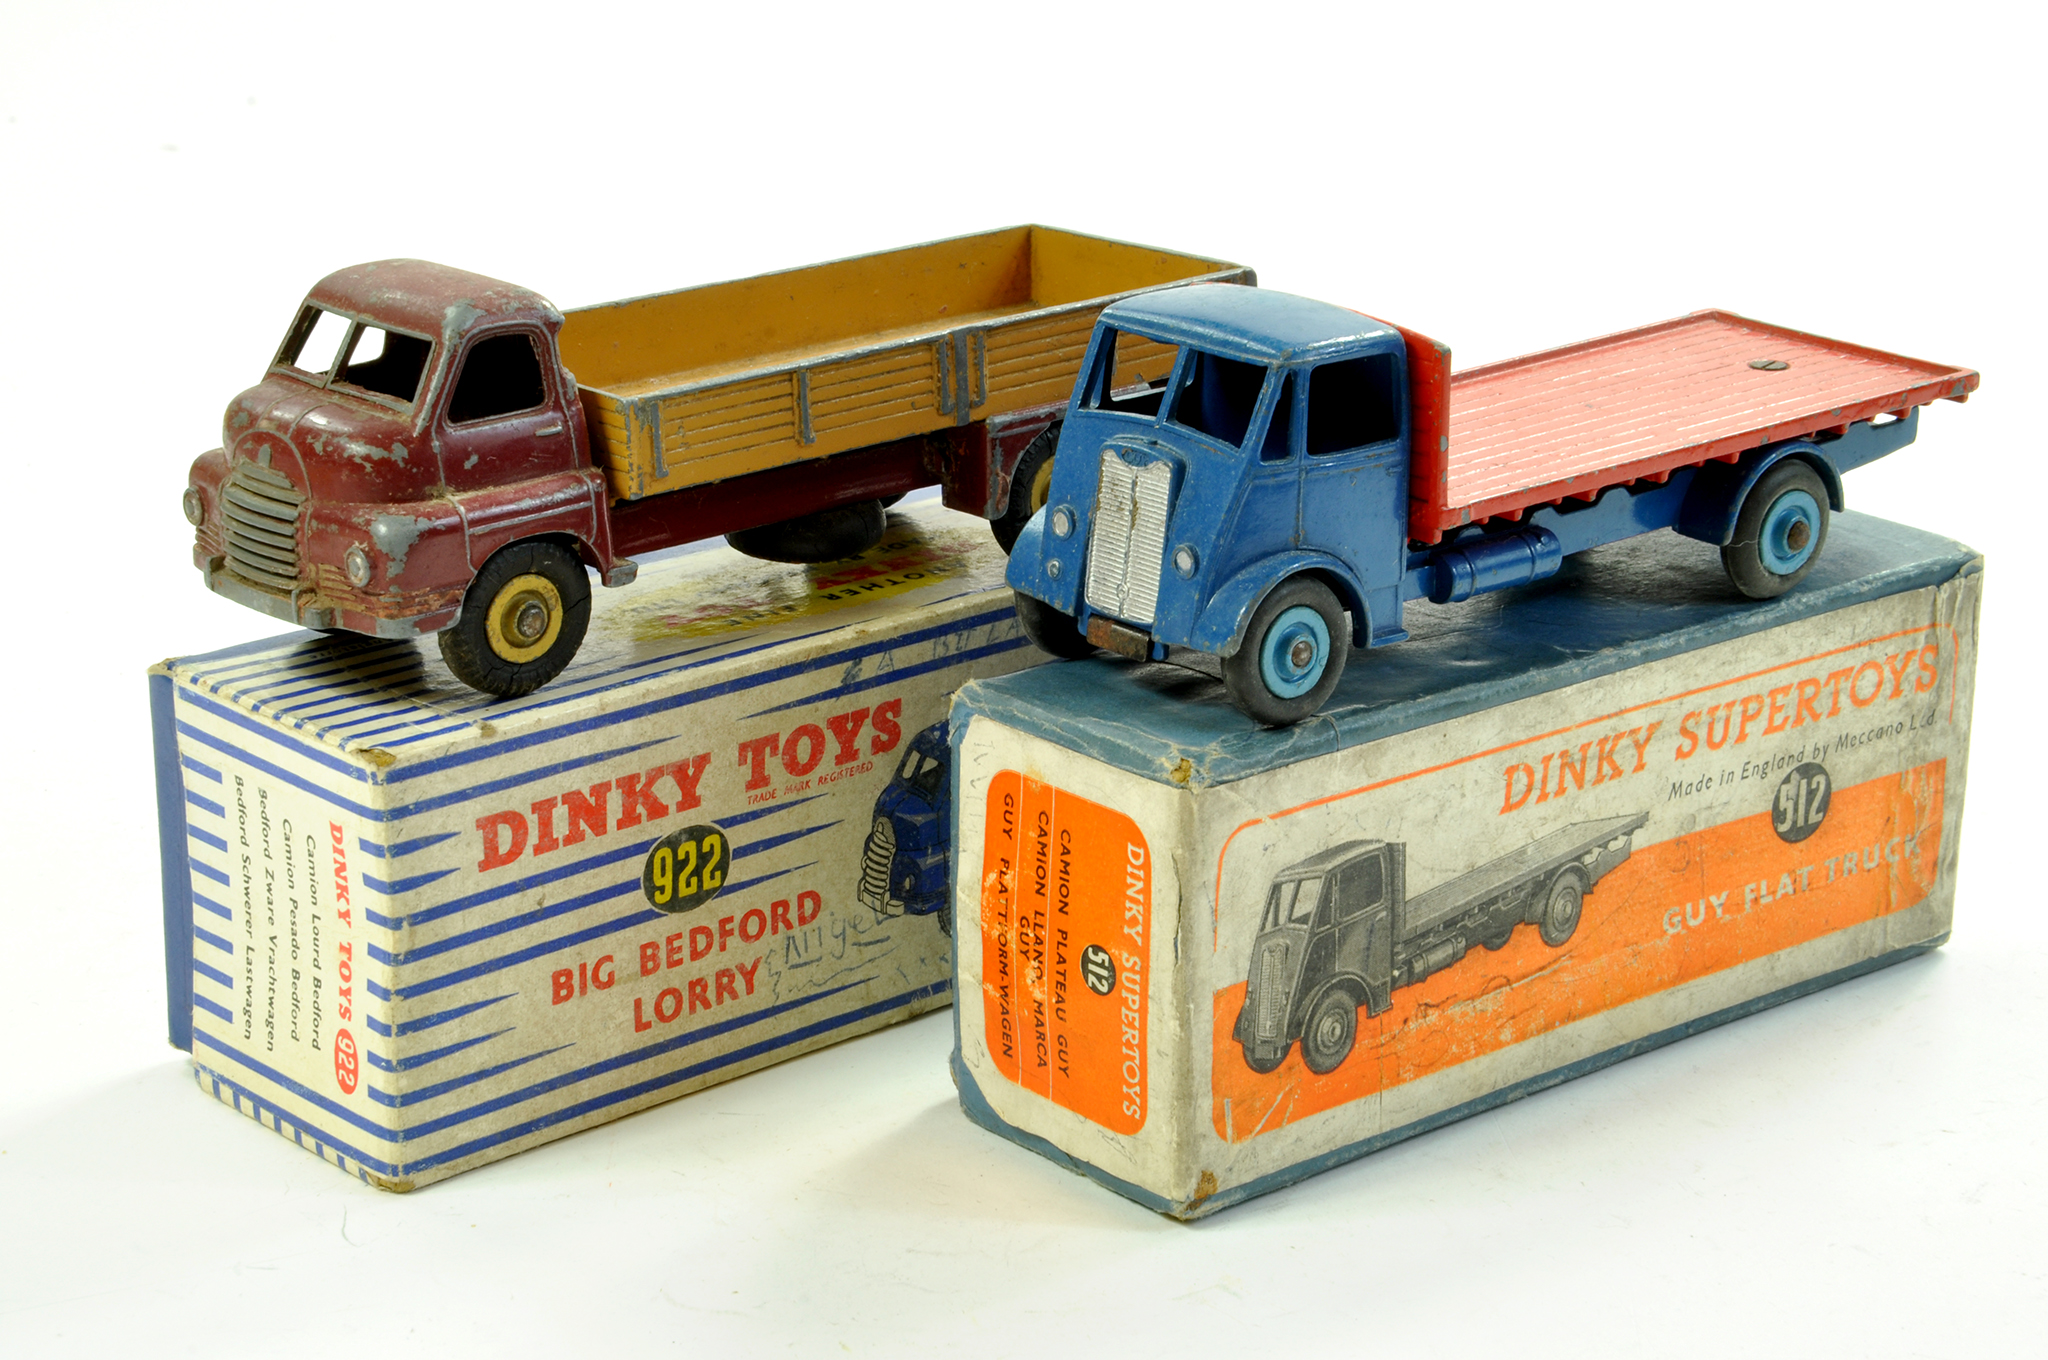 Dinky (worn) duo comprising No. 922 Bedford Lorry and No. 512 Guy Flat Truck. Fair to good in fair